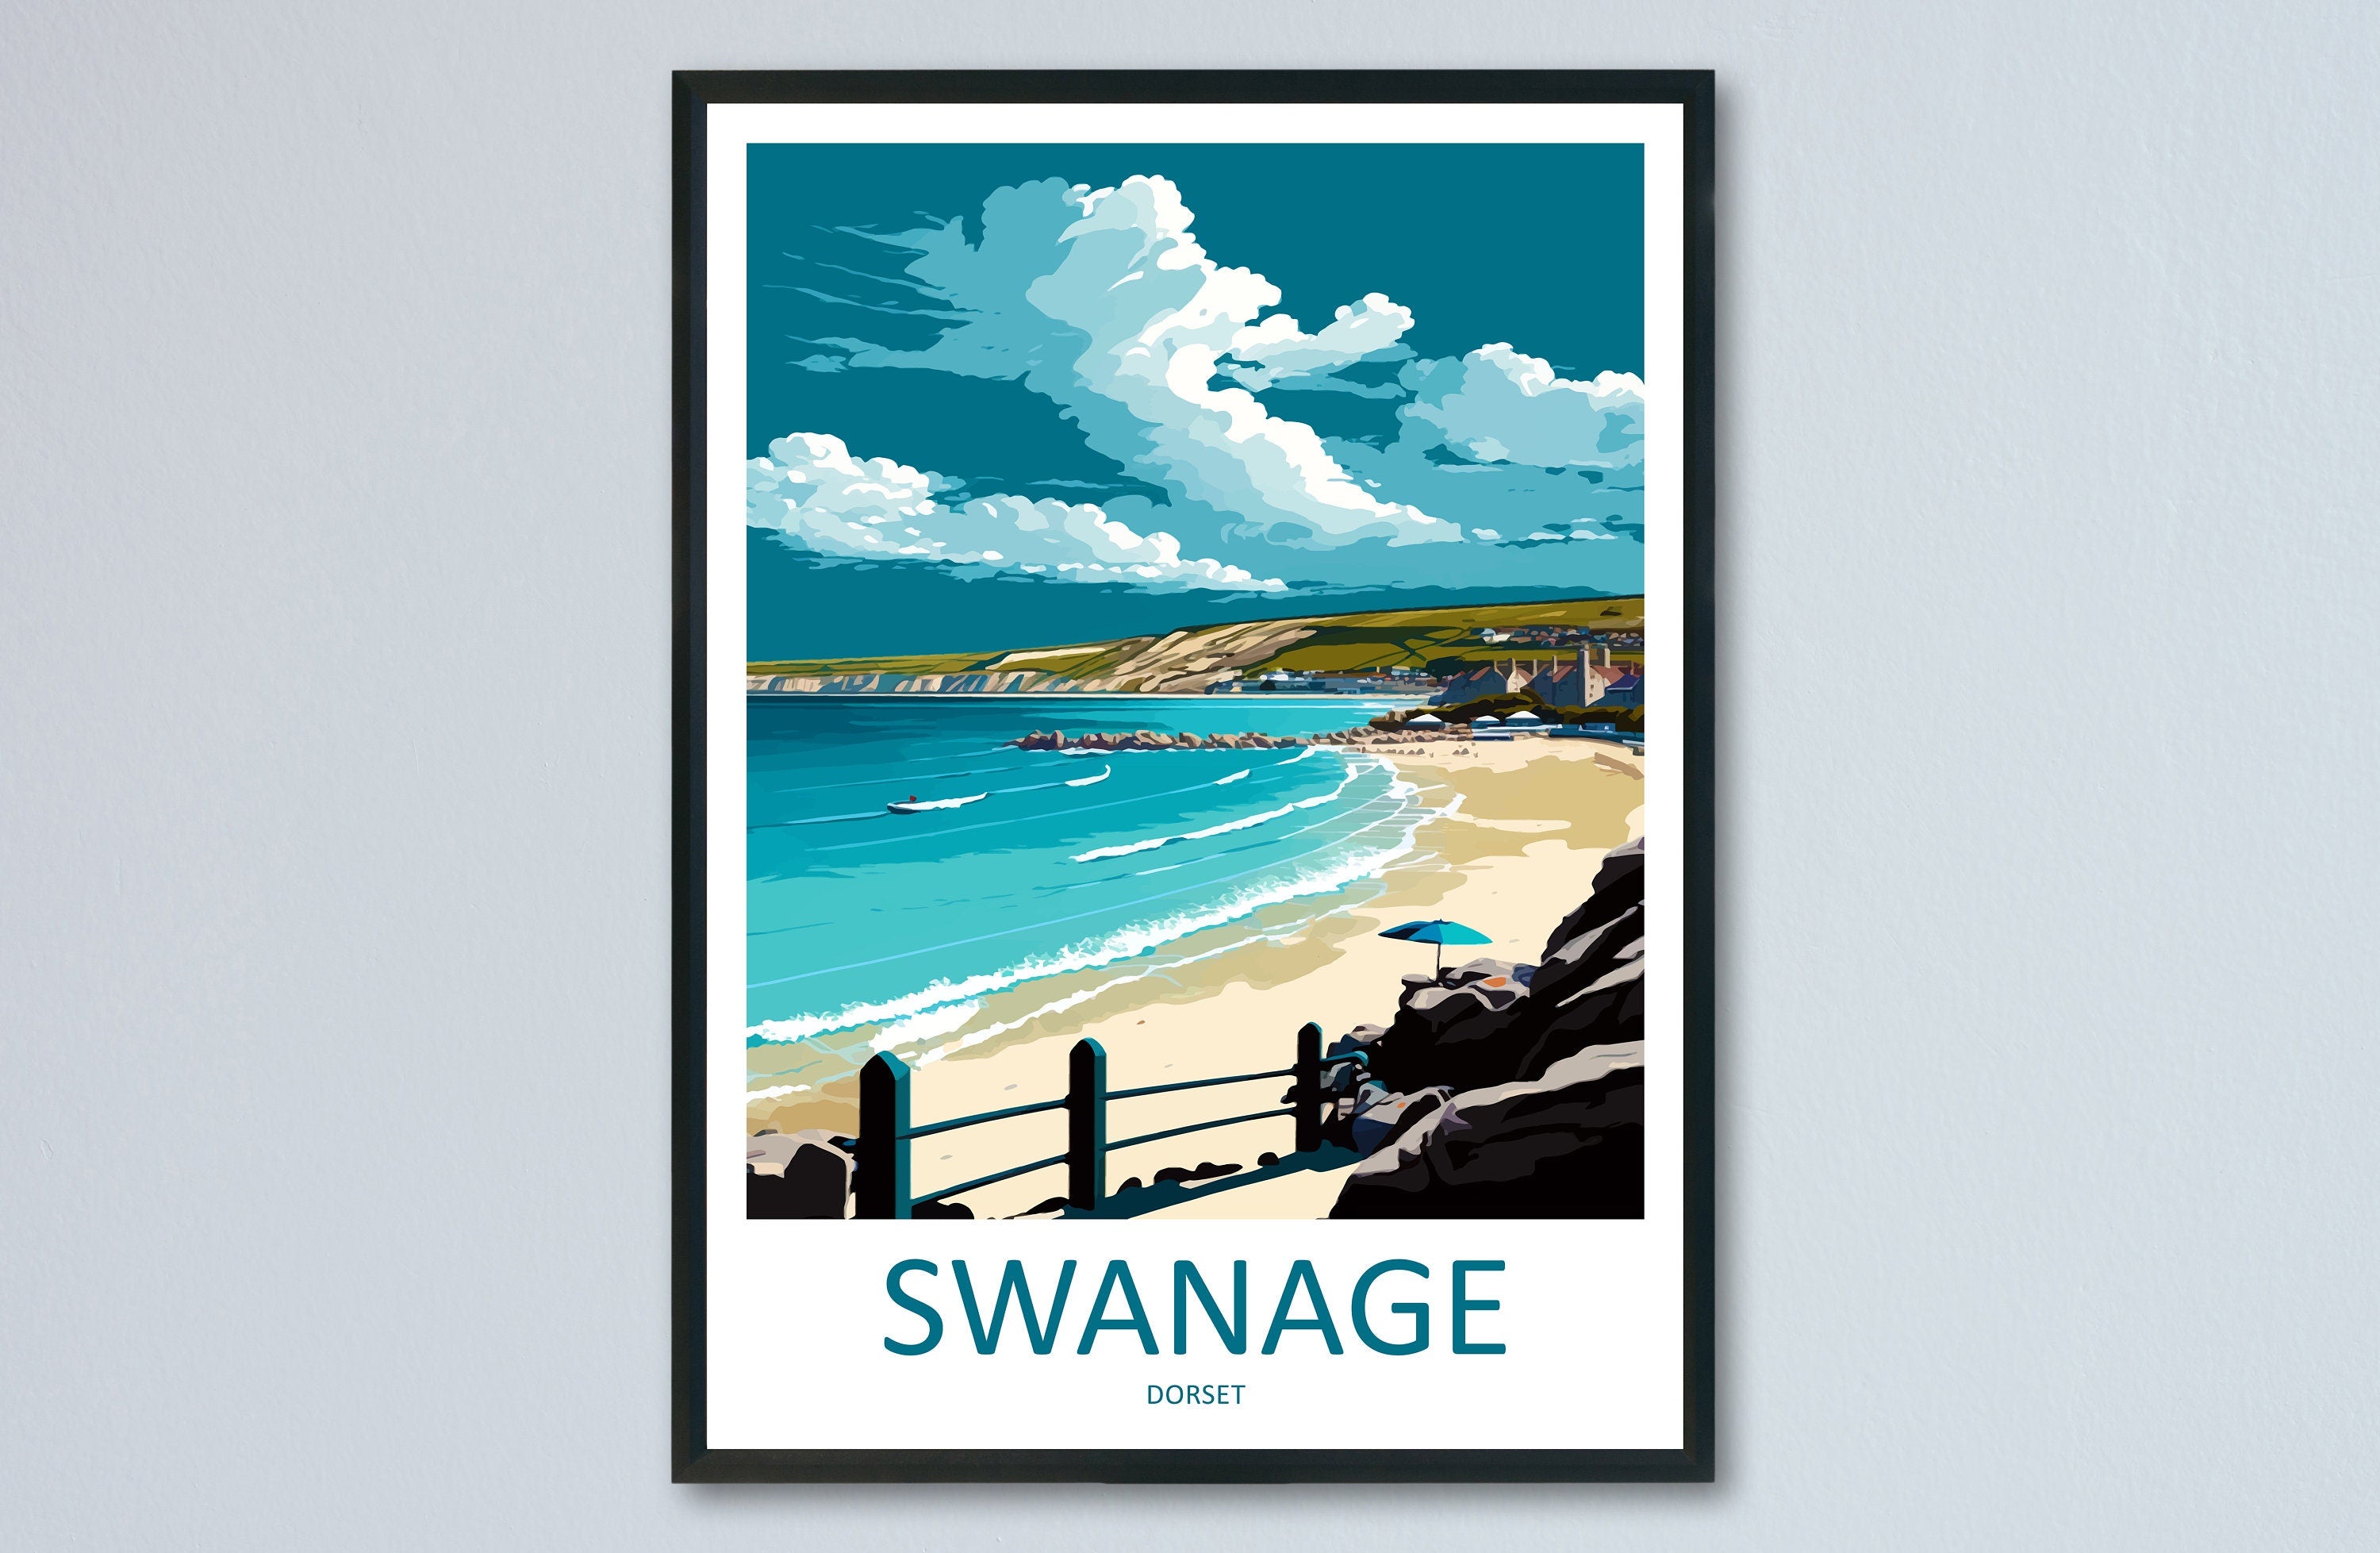 Swanage Travel Print Wall Art Swanage Wall Hanging Home Décor Swanage Gift Art Lovers England Art Lover Gift Swanage Wall Art Poster